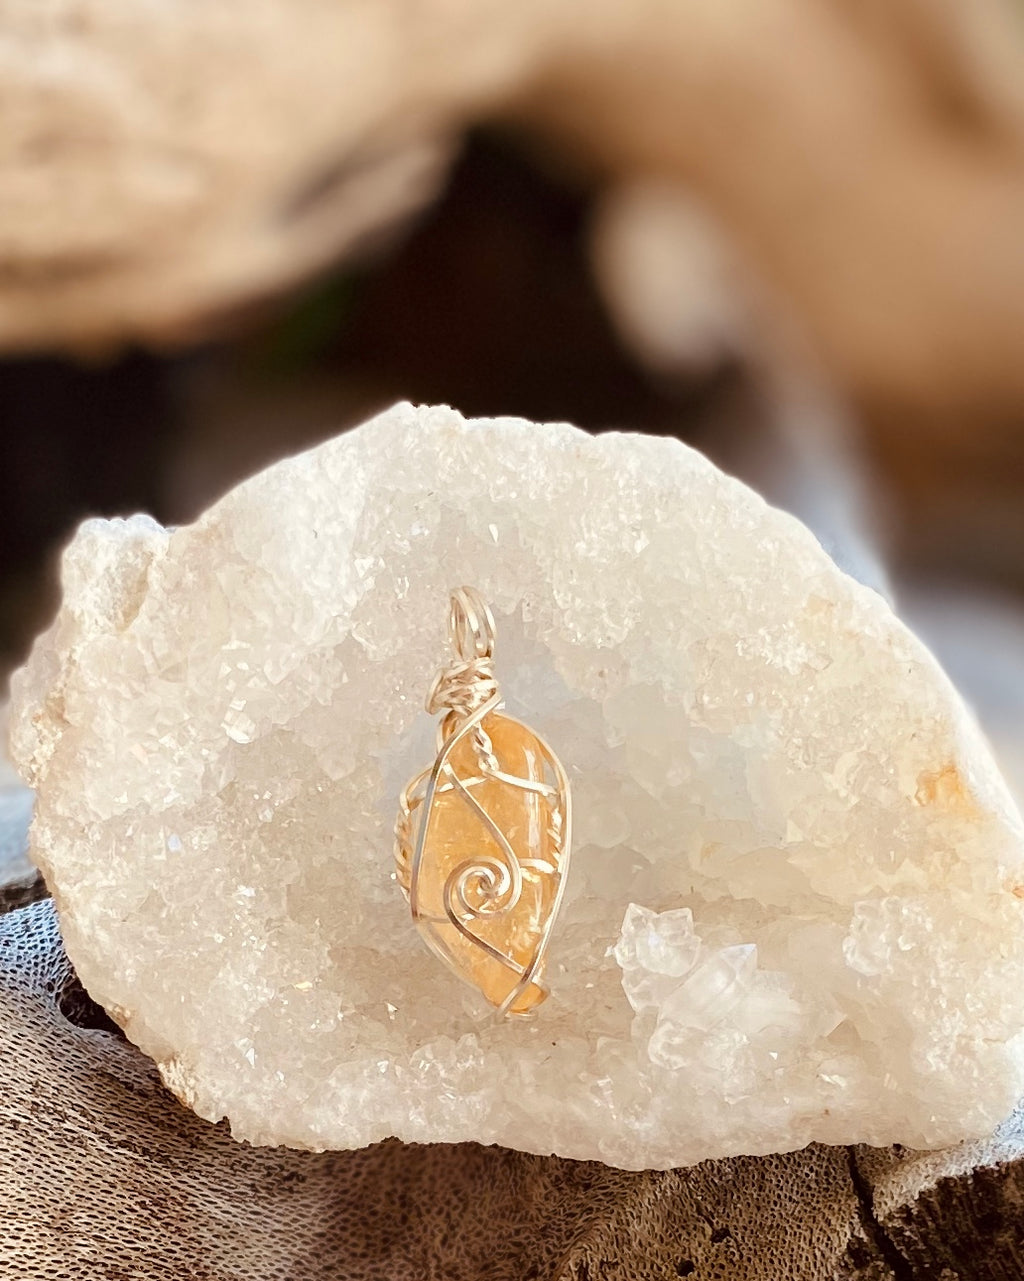 Artisan crafted natural Citrine pendant necklace handmade in Byron Bay. Wrapped in fine silver-plated copper wire.